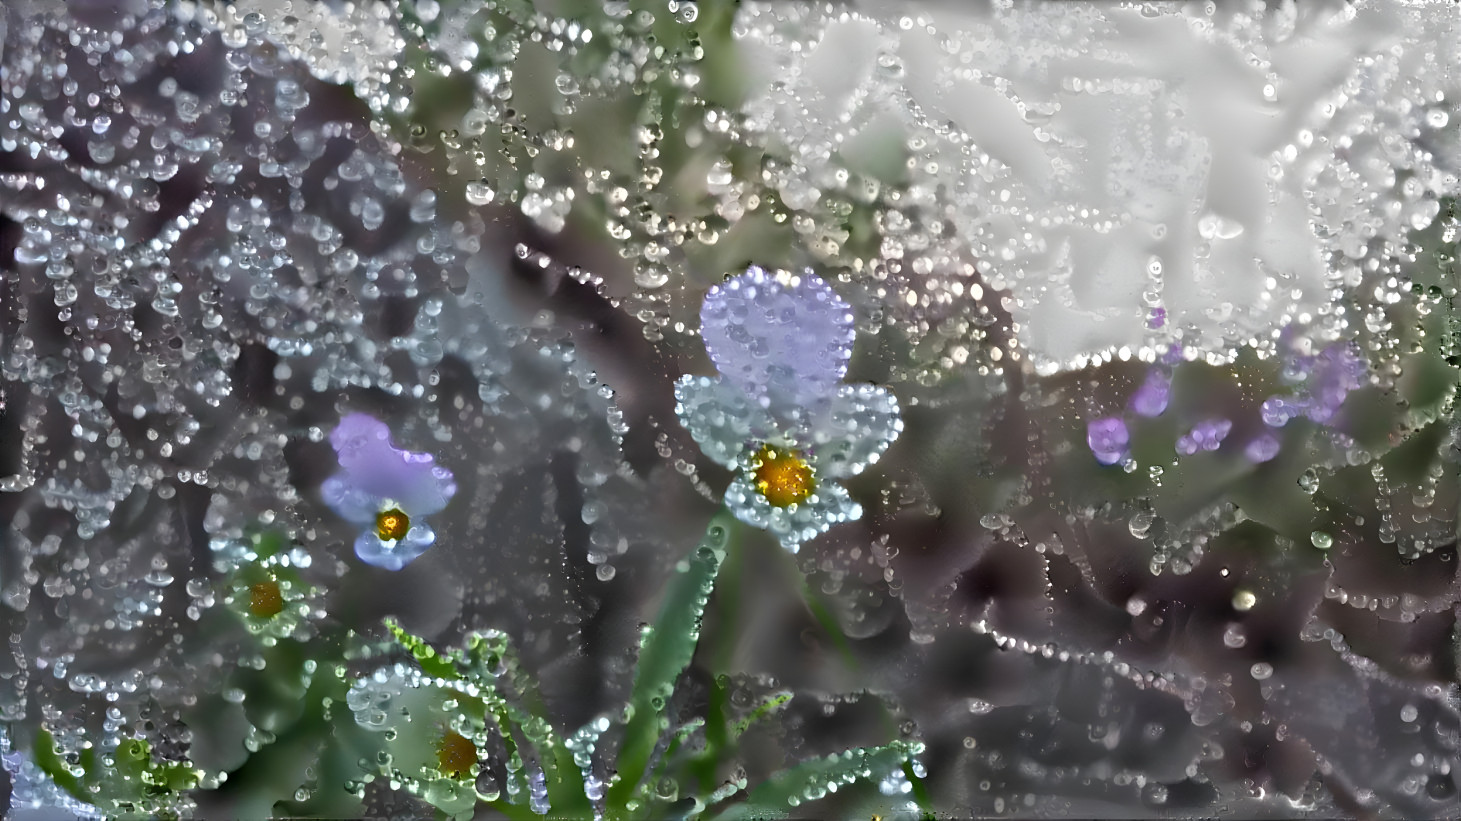 Pansy of the morning dew #2